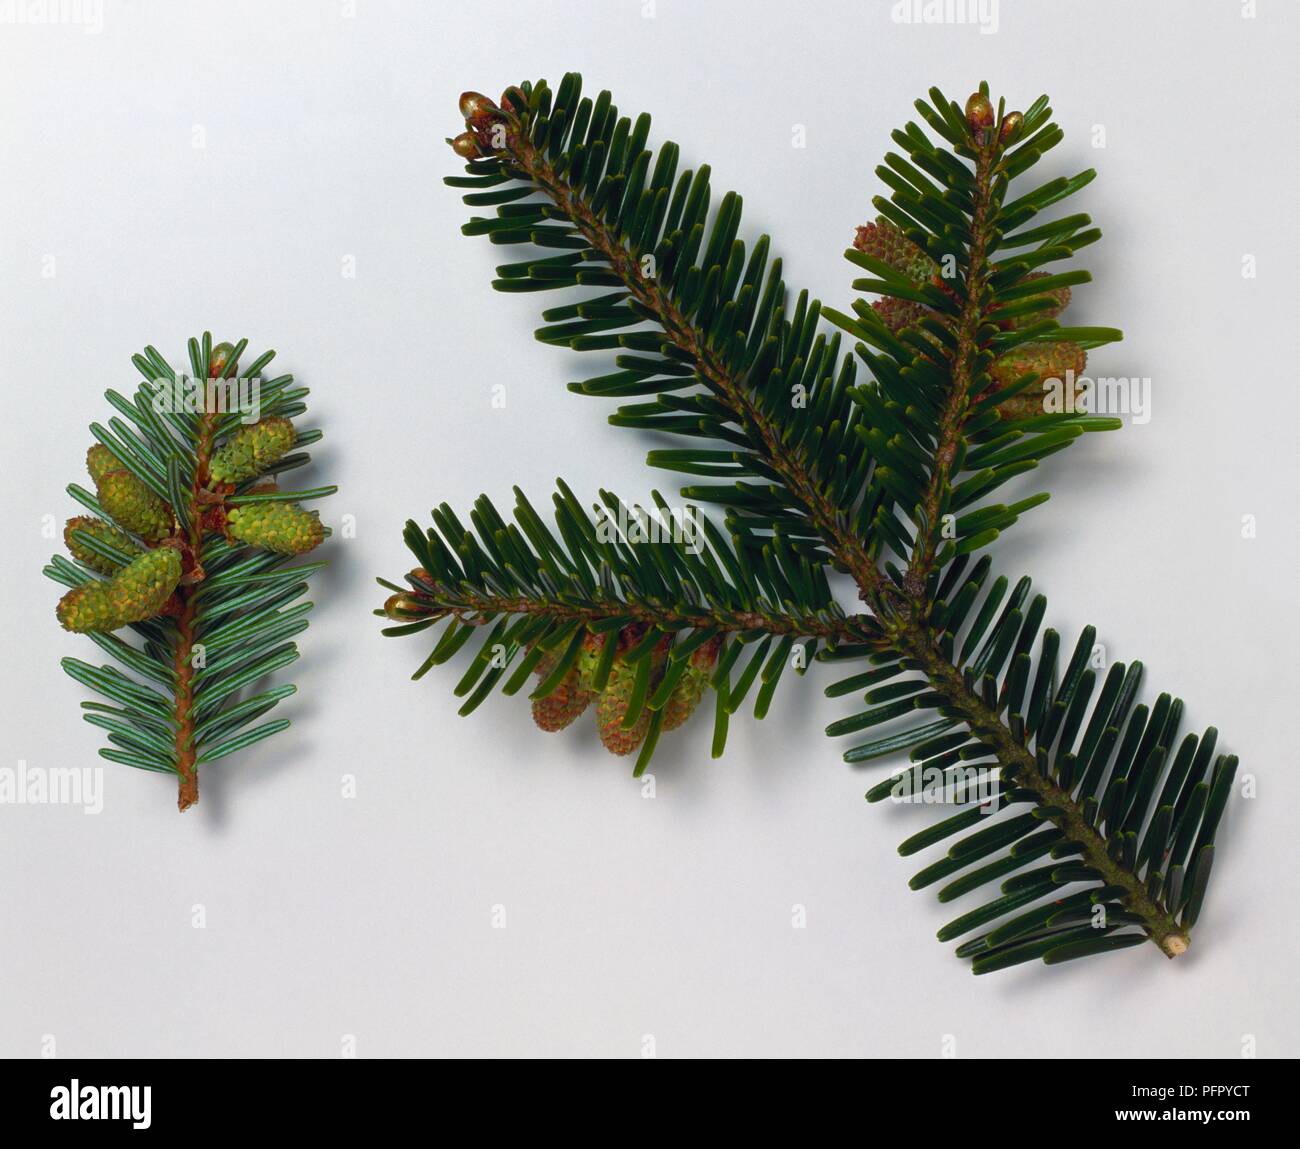 Abies alba (European silver fir), stems with green leaves and male flowers Stock Photo